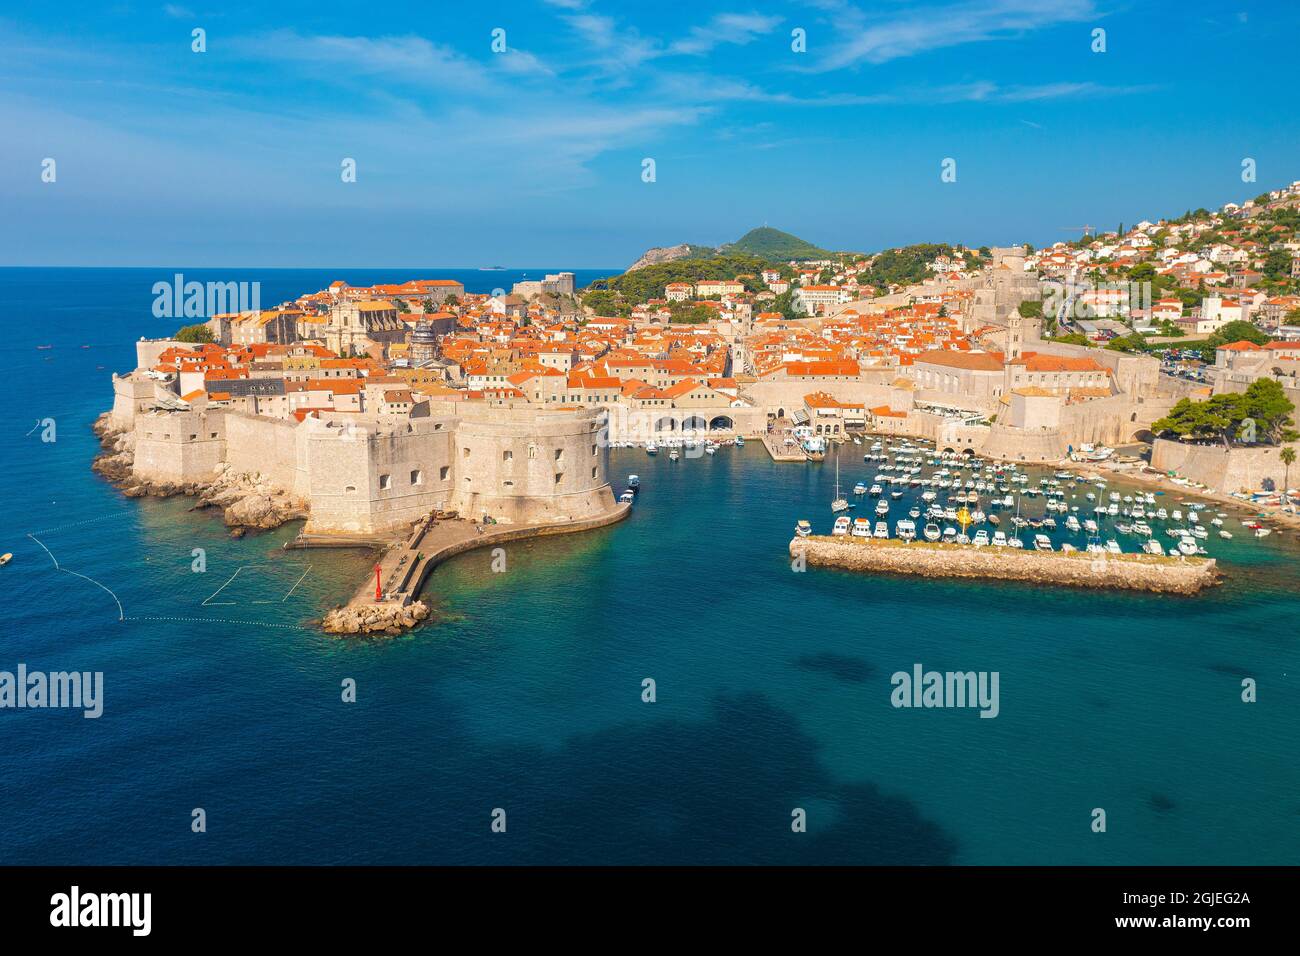 Aerial view of the old town of Dubrovnik Stock Photo